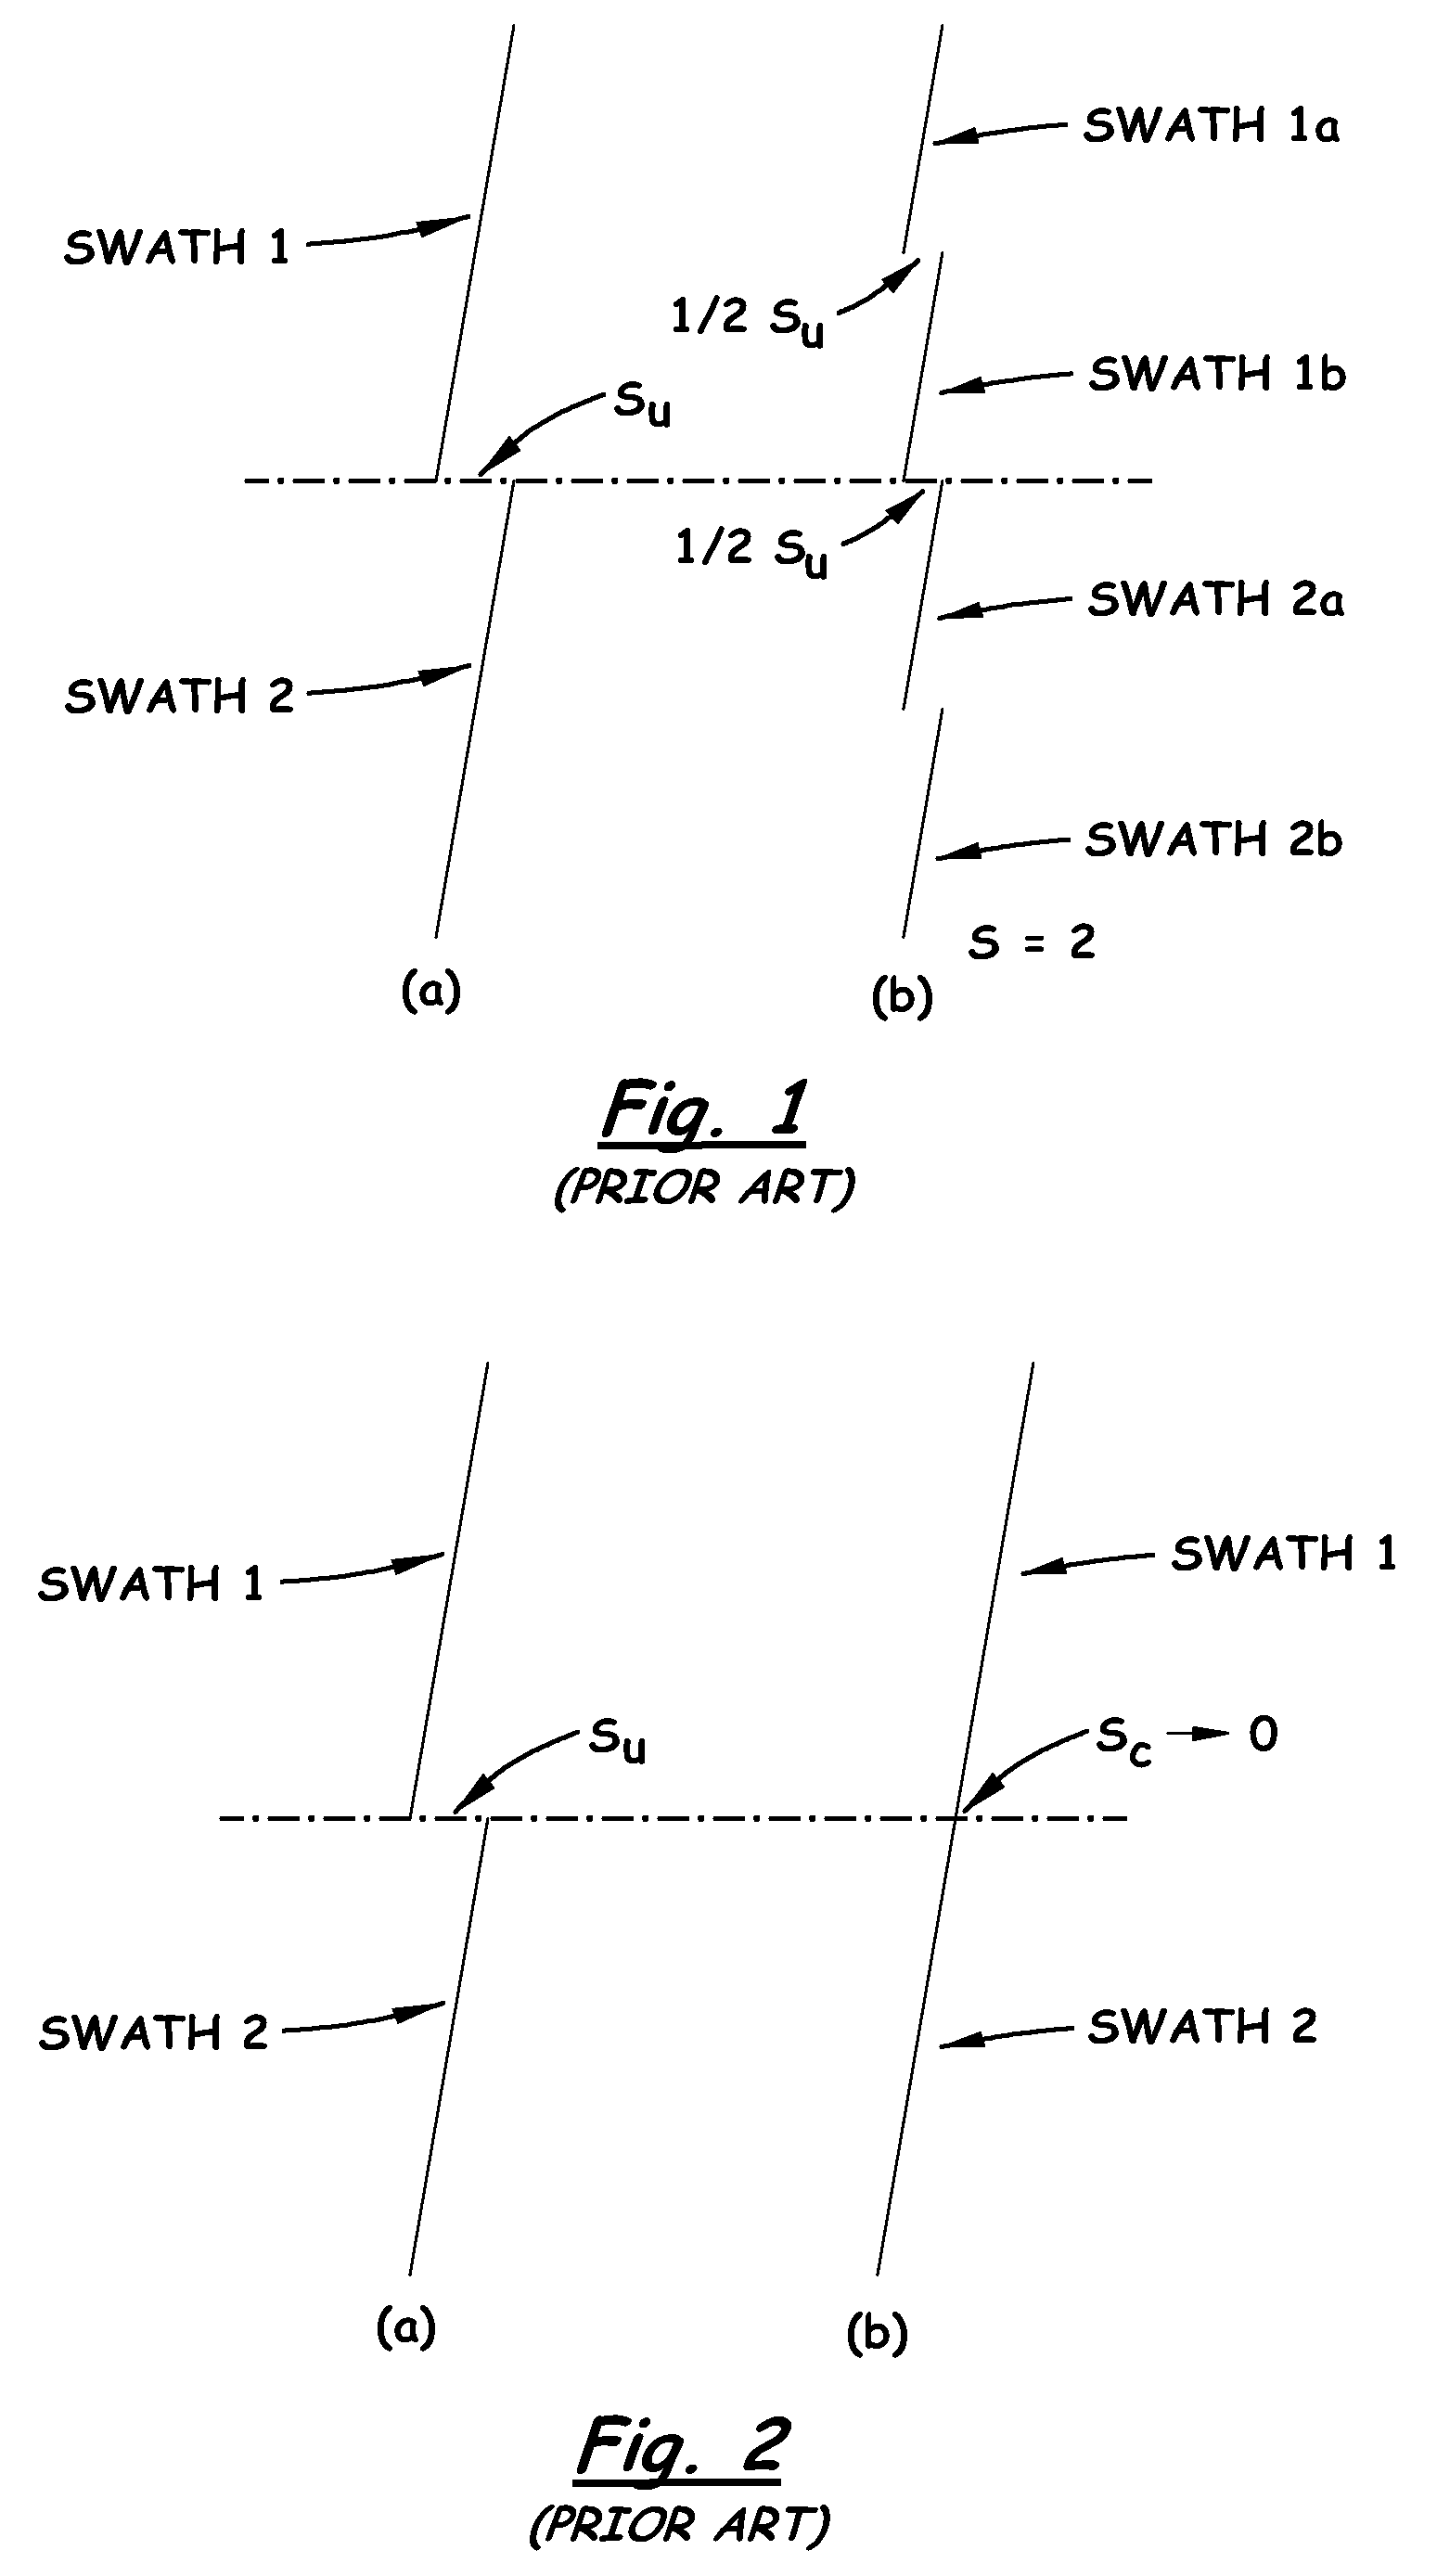 System and Method for Selecting and Applying Appropriate Print Quality Defect Correction Technique to Compensate for Specified Print Quality Defect